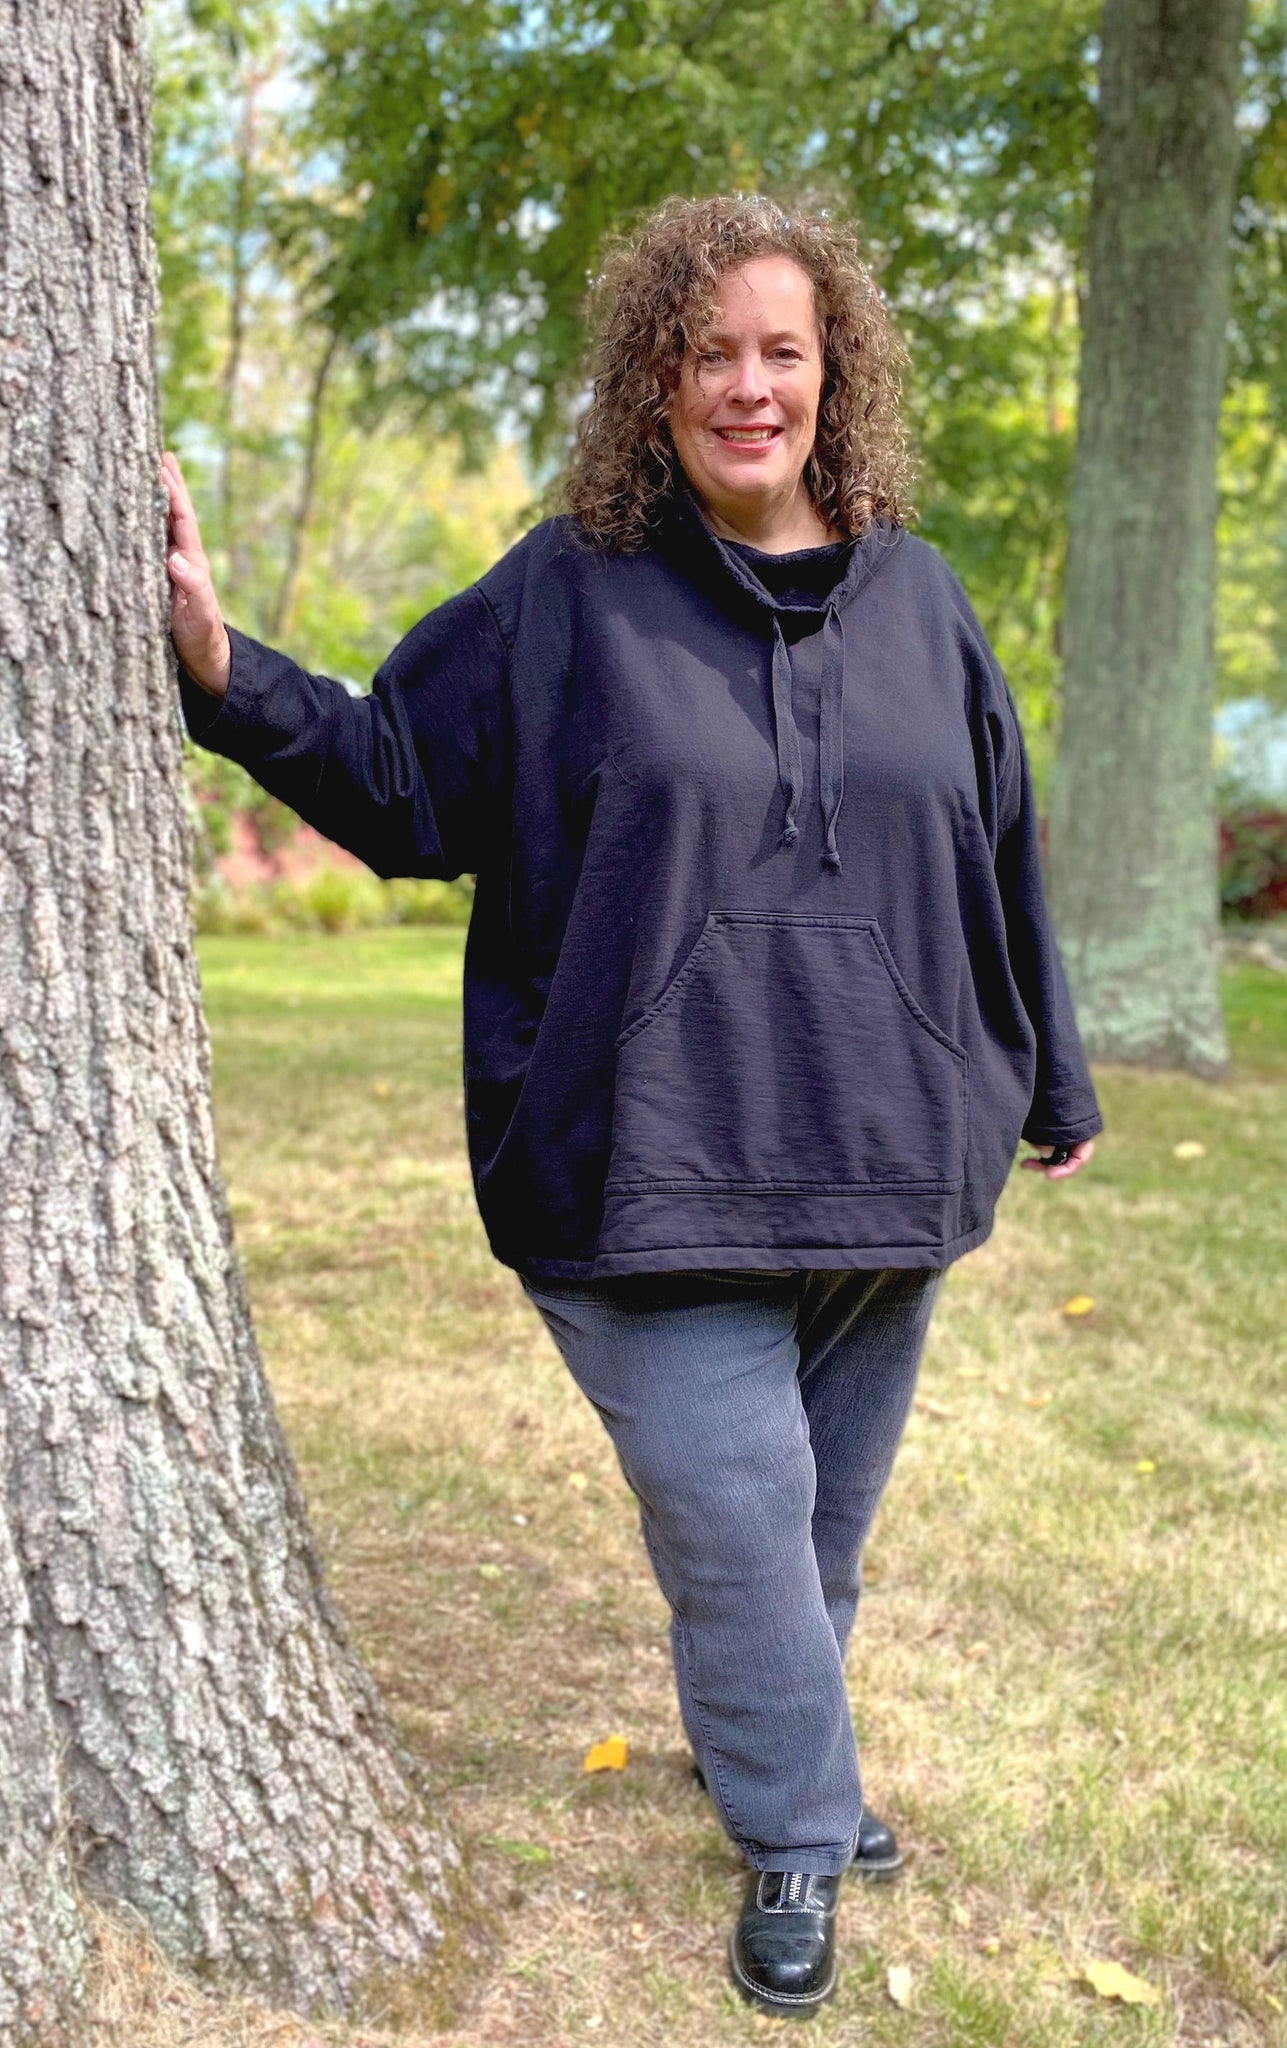 Palazzo Pants in Plus and Extended Sizes - made to order just for you! –  Love Your Peaches Clothing Co.